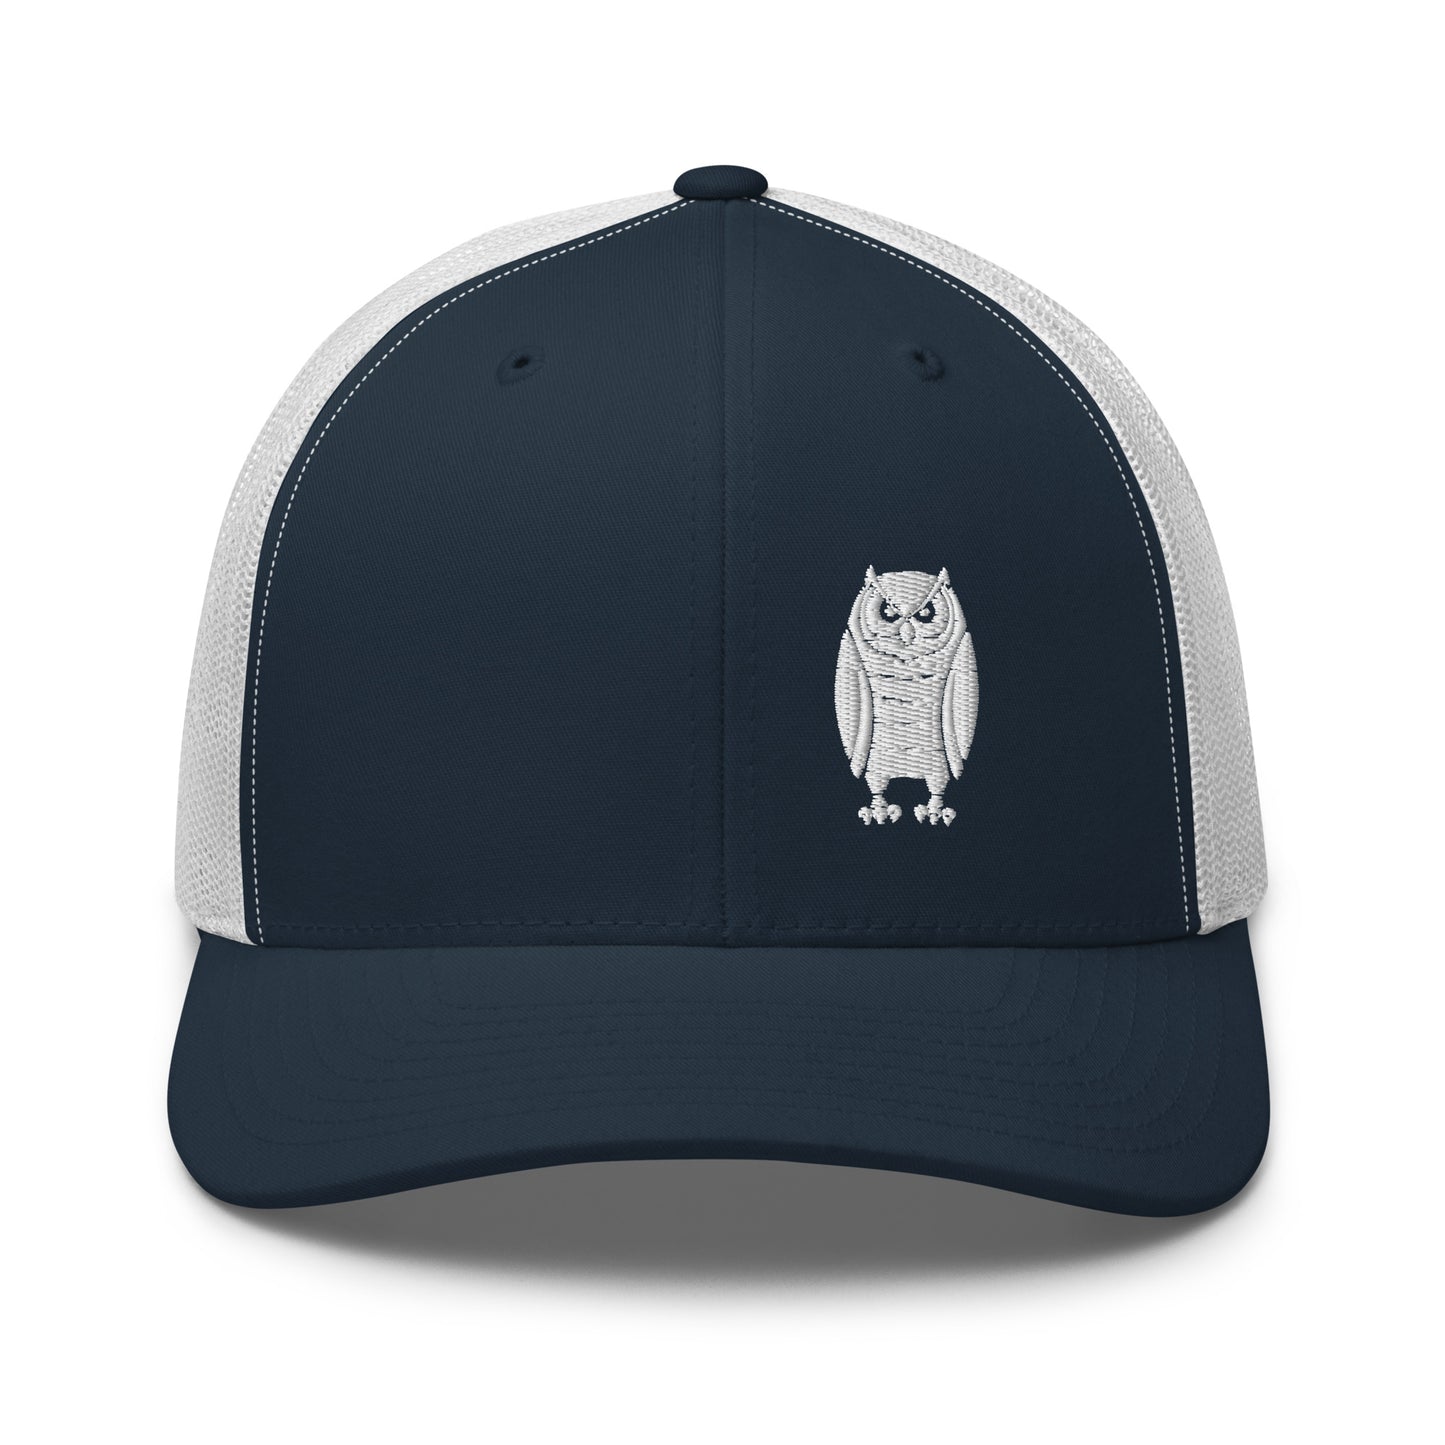 Owl Trucker Hat.  A Yupoon 6606 blue and white hat with an Owl embroidered on it.